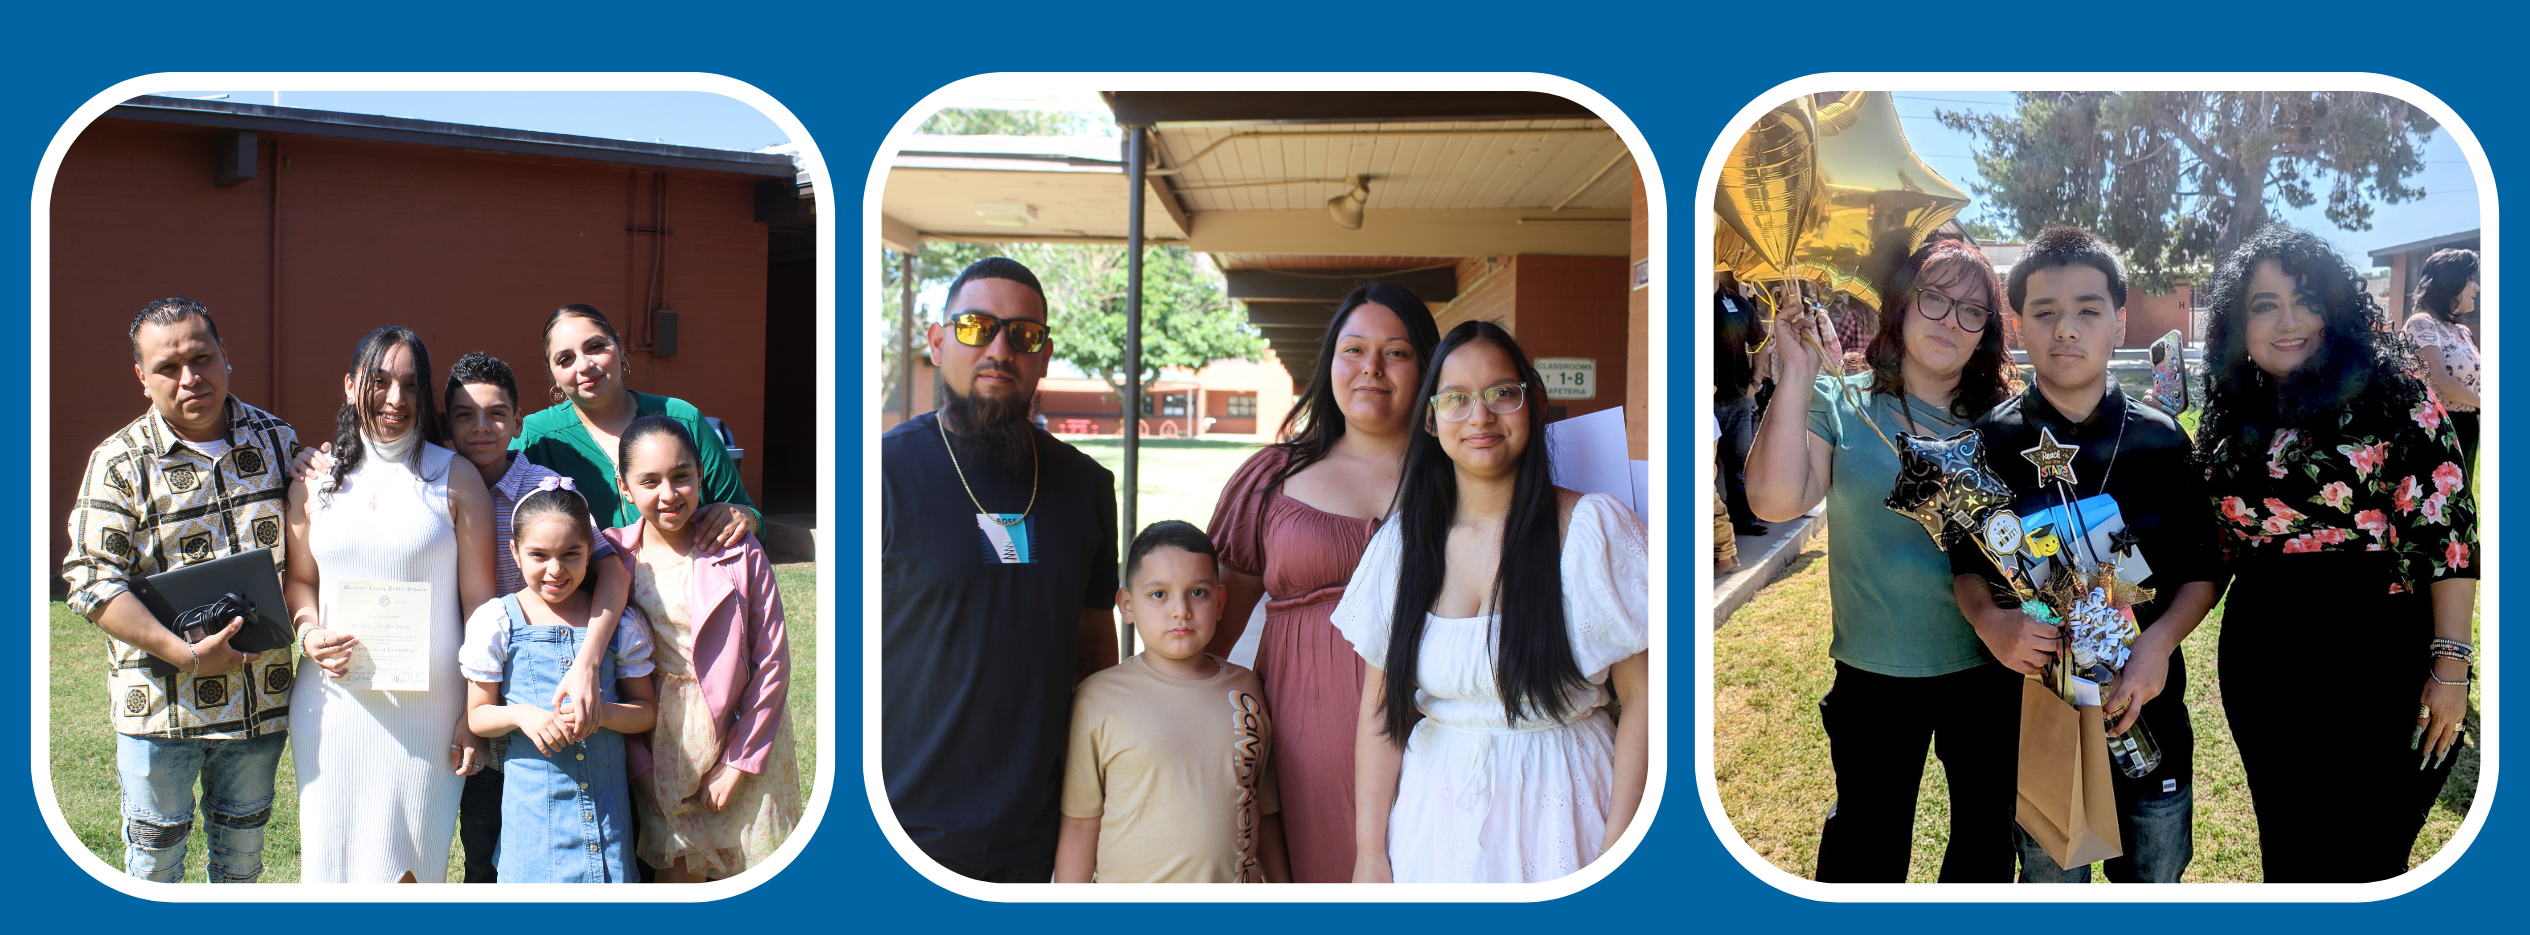 3 pictures, students and their families celebrating on their 8th grade promotion day